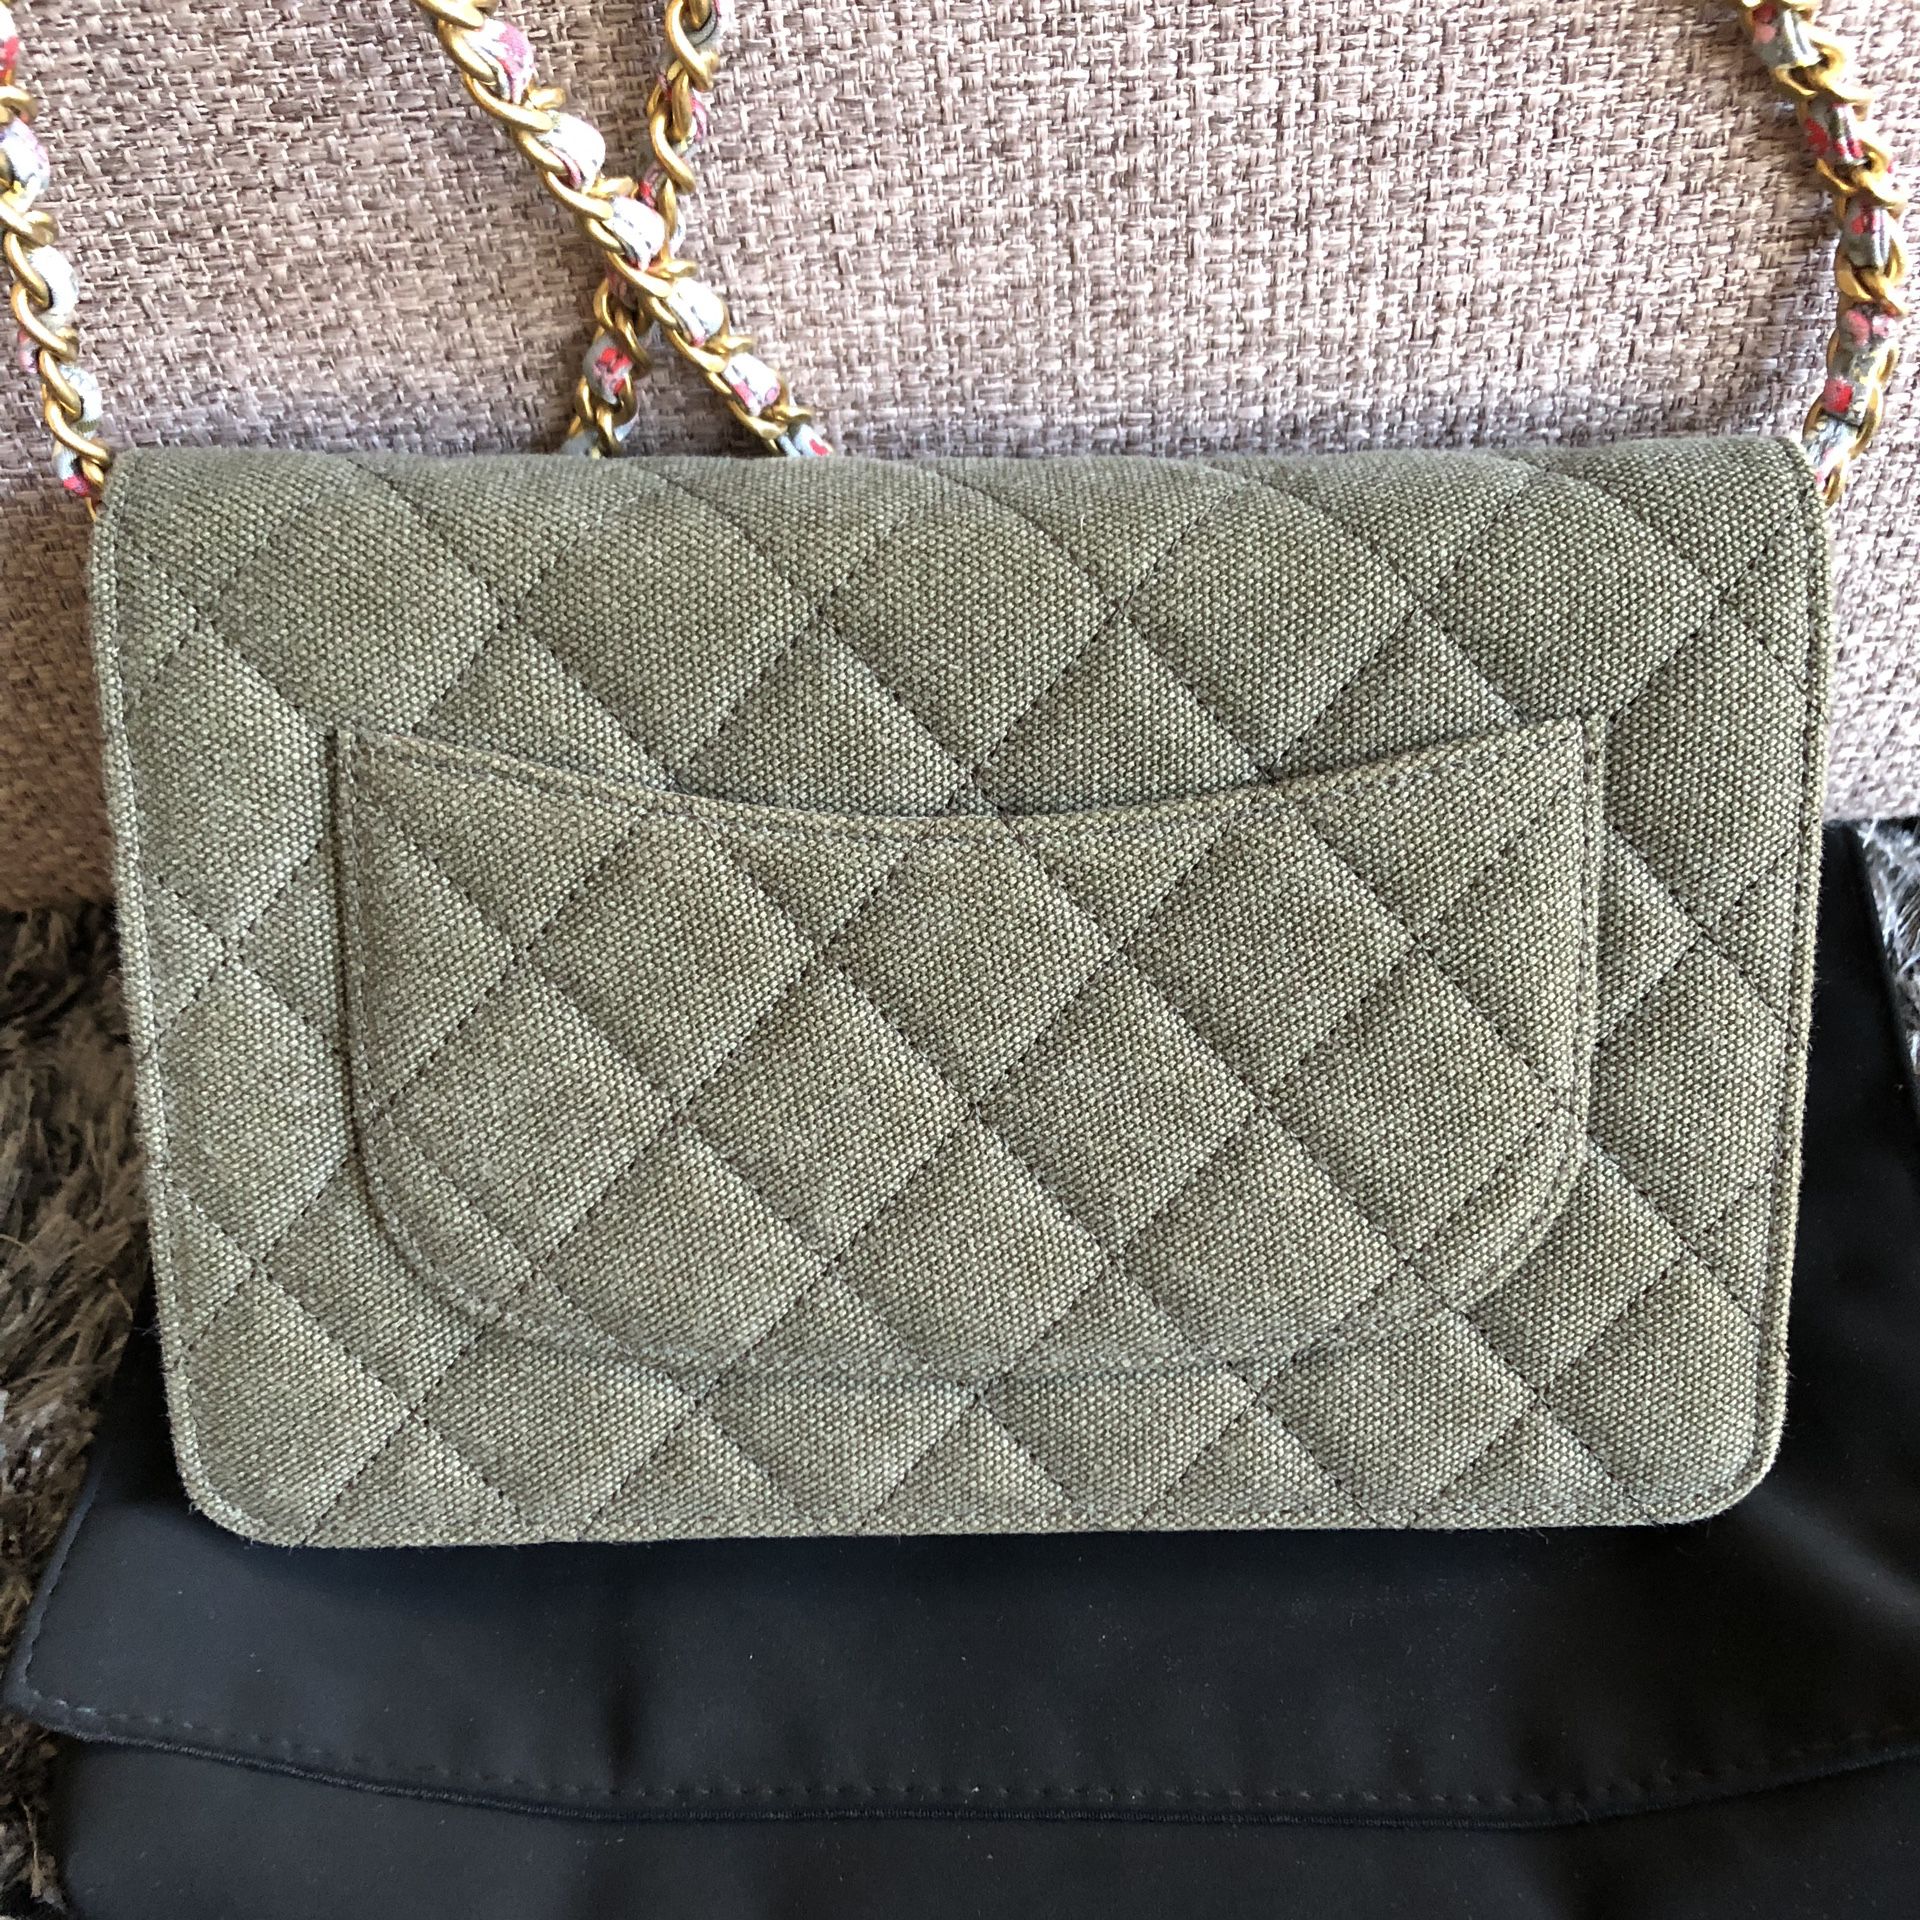 Authentic Chanel Green Perforated Leather CC Logo Long Full Flap Bag Wallet  for Sale in San Jose, CA - OfferUp